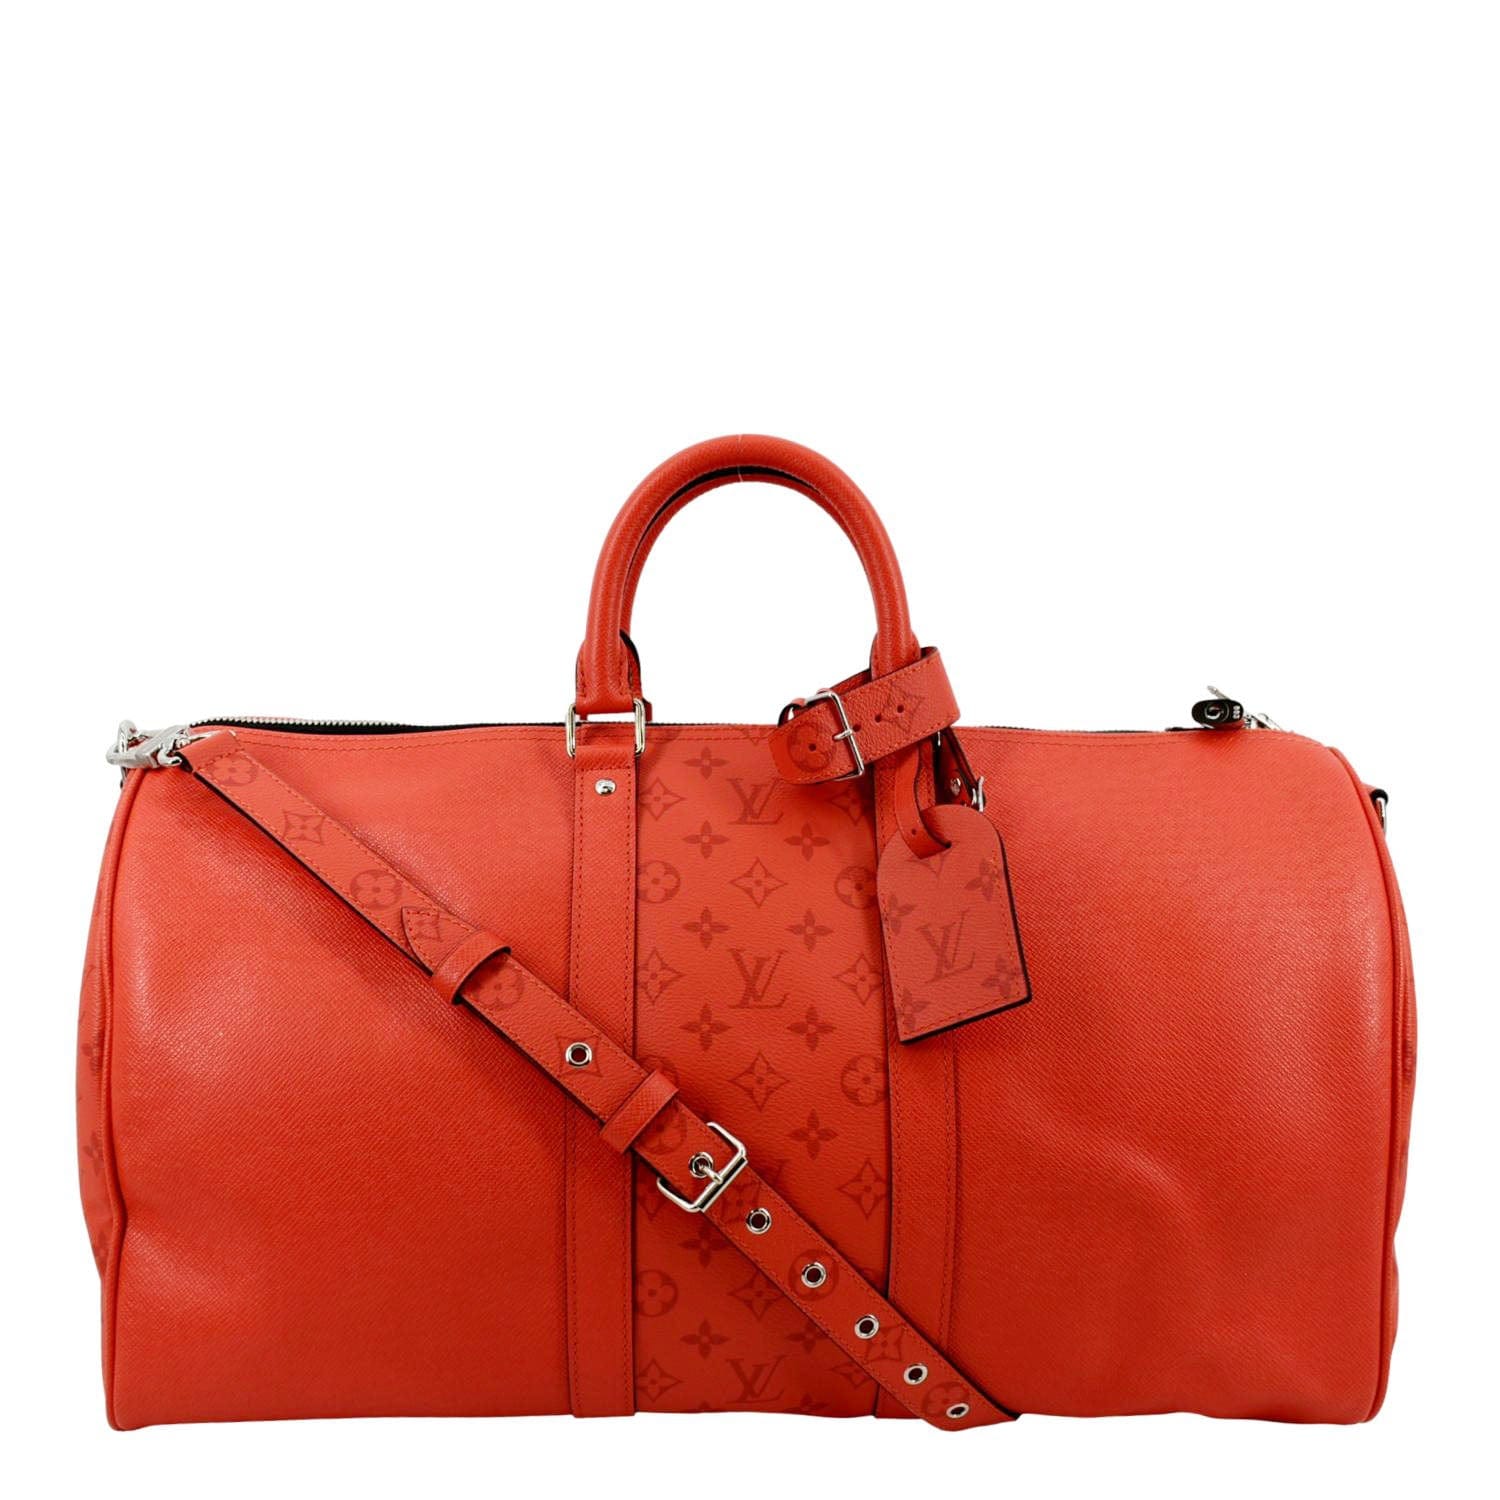 Designer Consigner - Louis Vuitton Keepall 50 Bandouliere like new